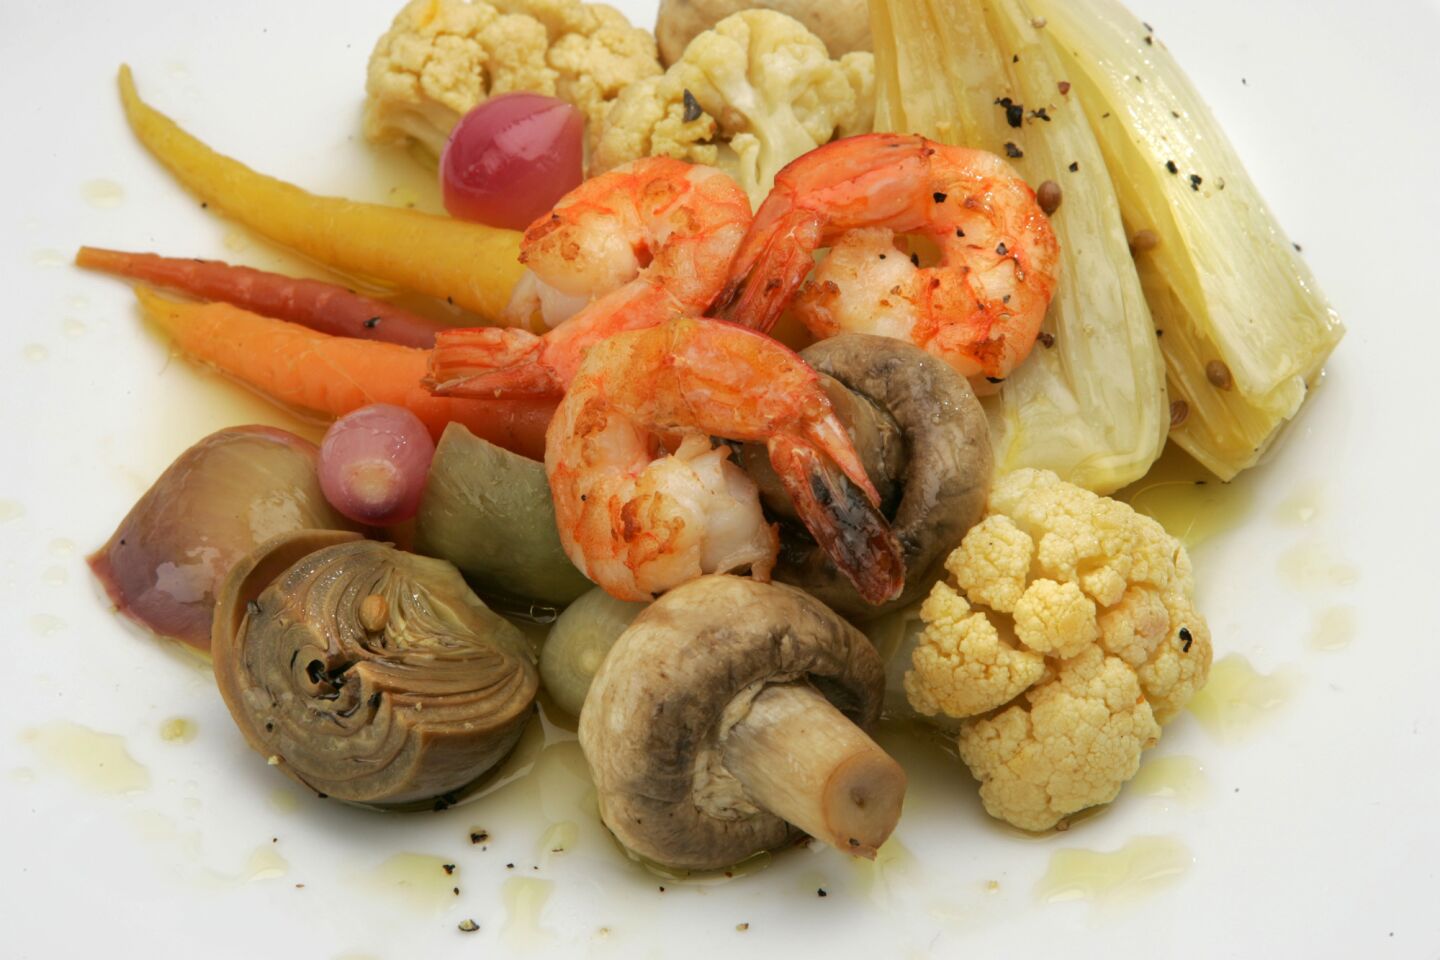 Mushrooms, cauliflower, artichokes, carrots, onions and fennel quickly simmered in a vibrant court bouillon and served with sauteed shrimp.